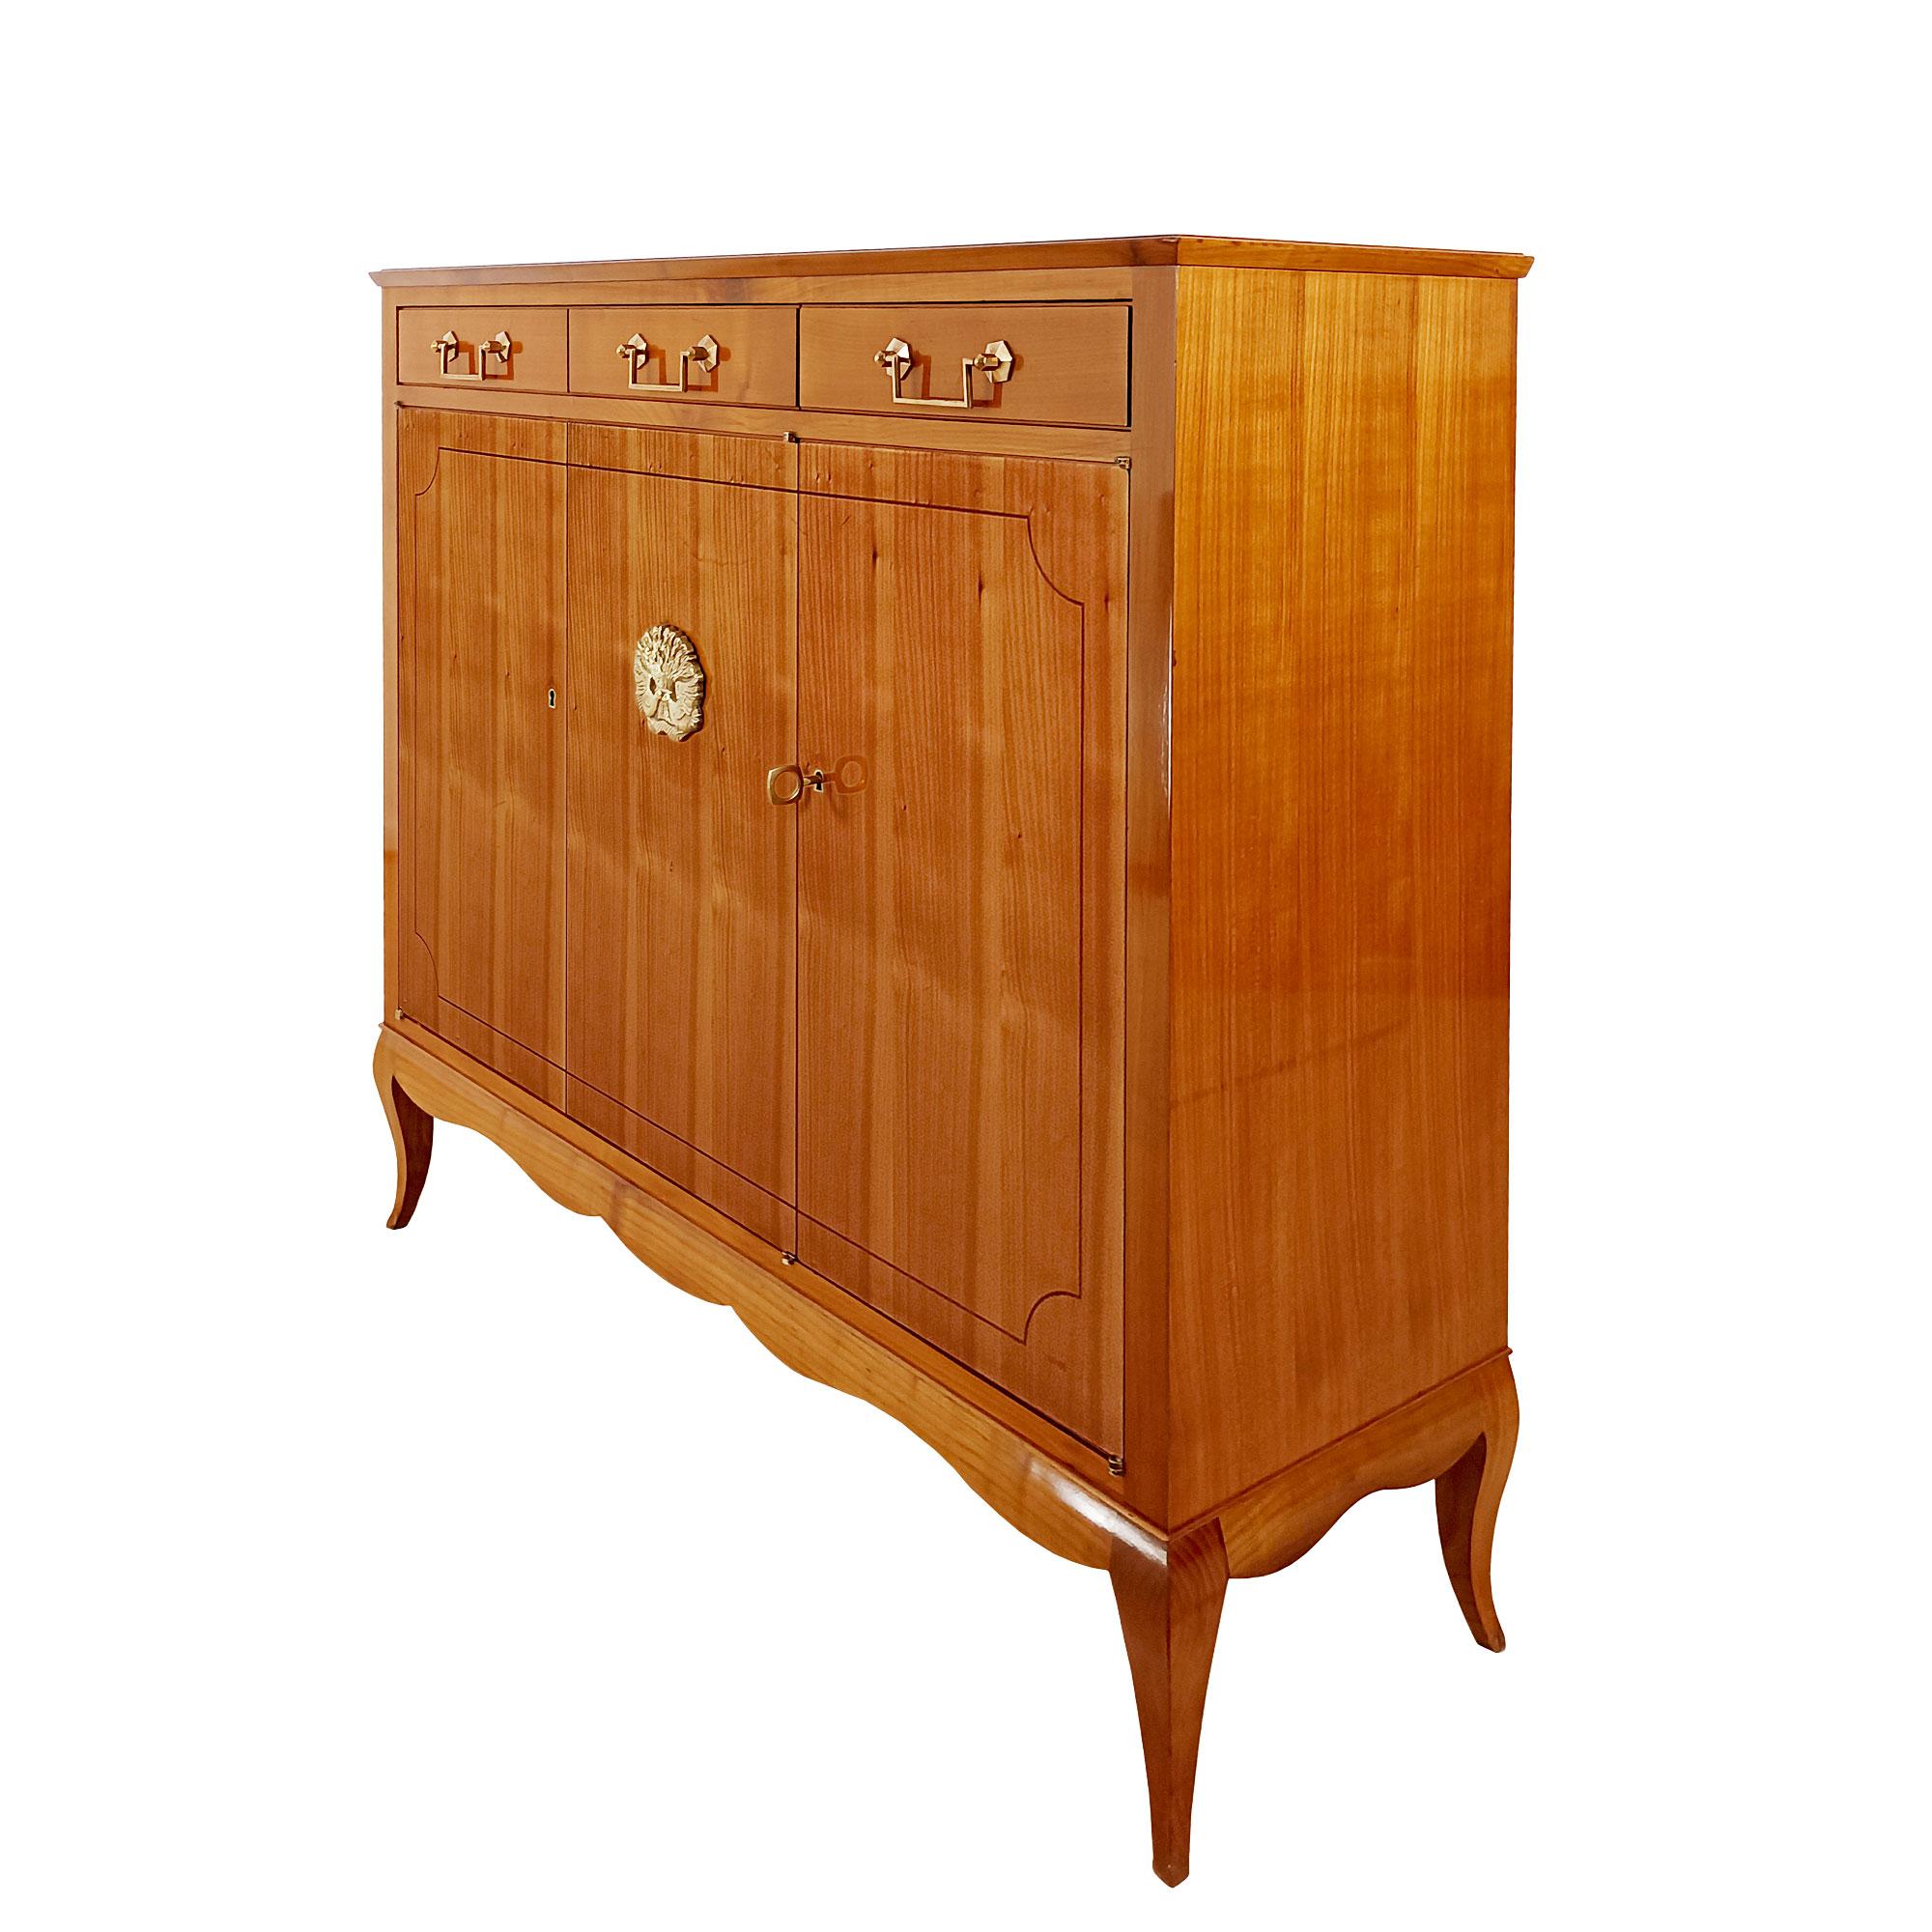 Small sideboard or cabinet in solid wood (oak and cherry) and cherry veneer, fine mahogany rods on the doors, polished bronze “doves” medallion on the central door, polished brass handles and hardware. Very high quality of craftsmanship. French